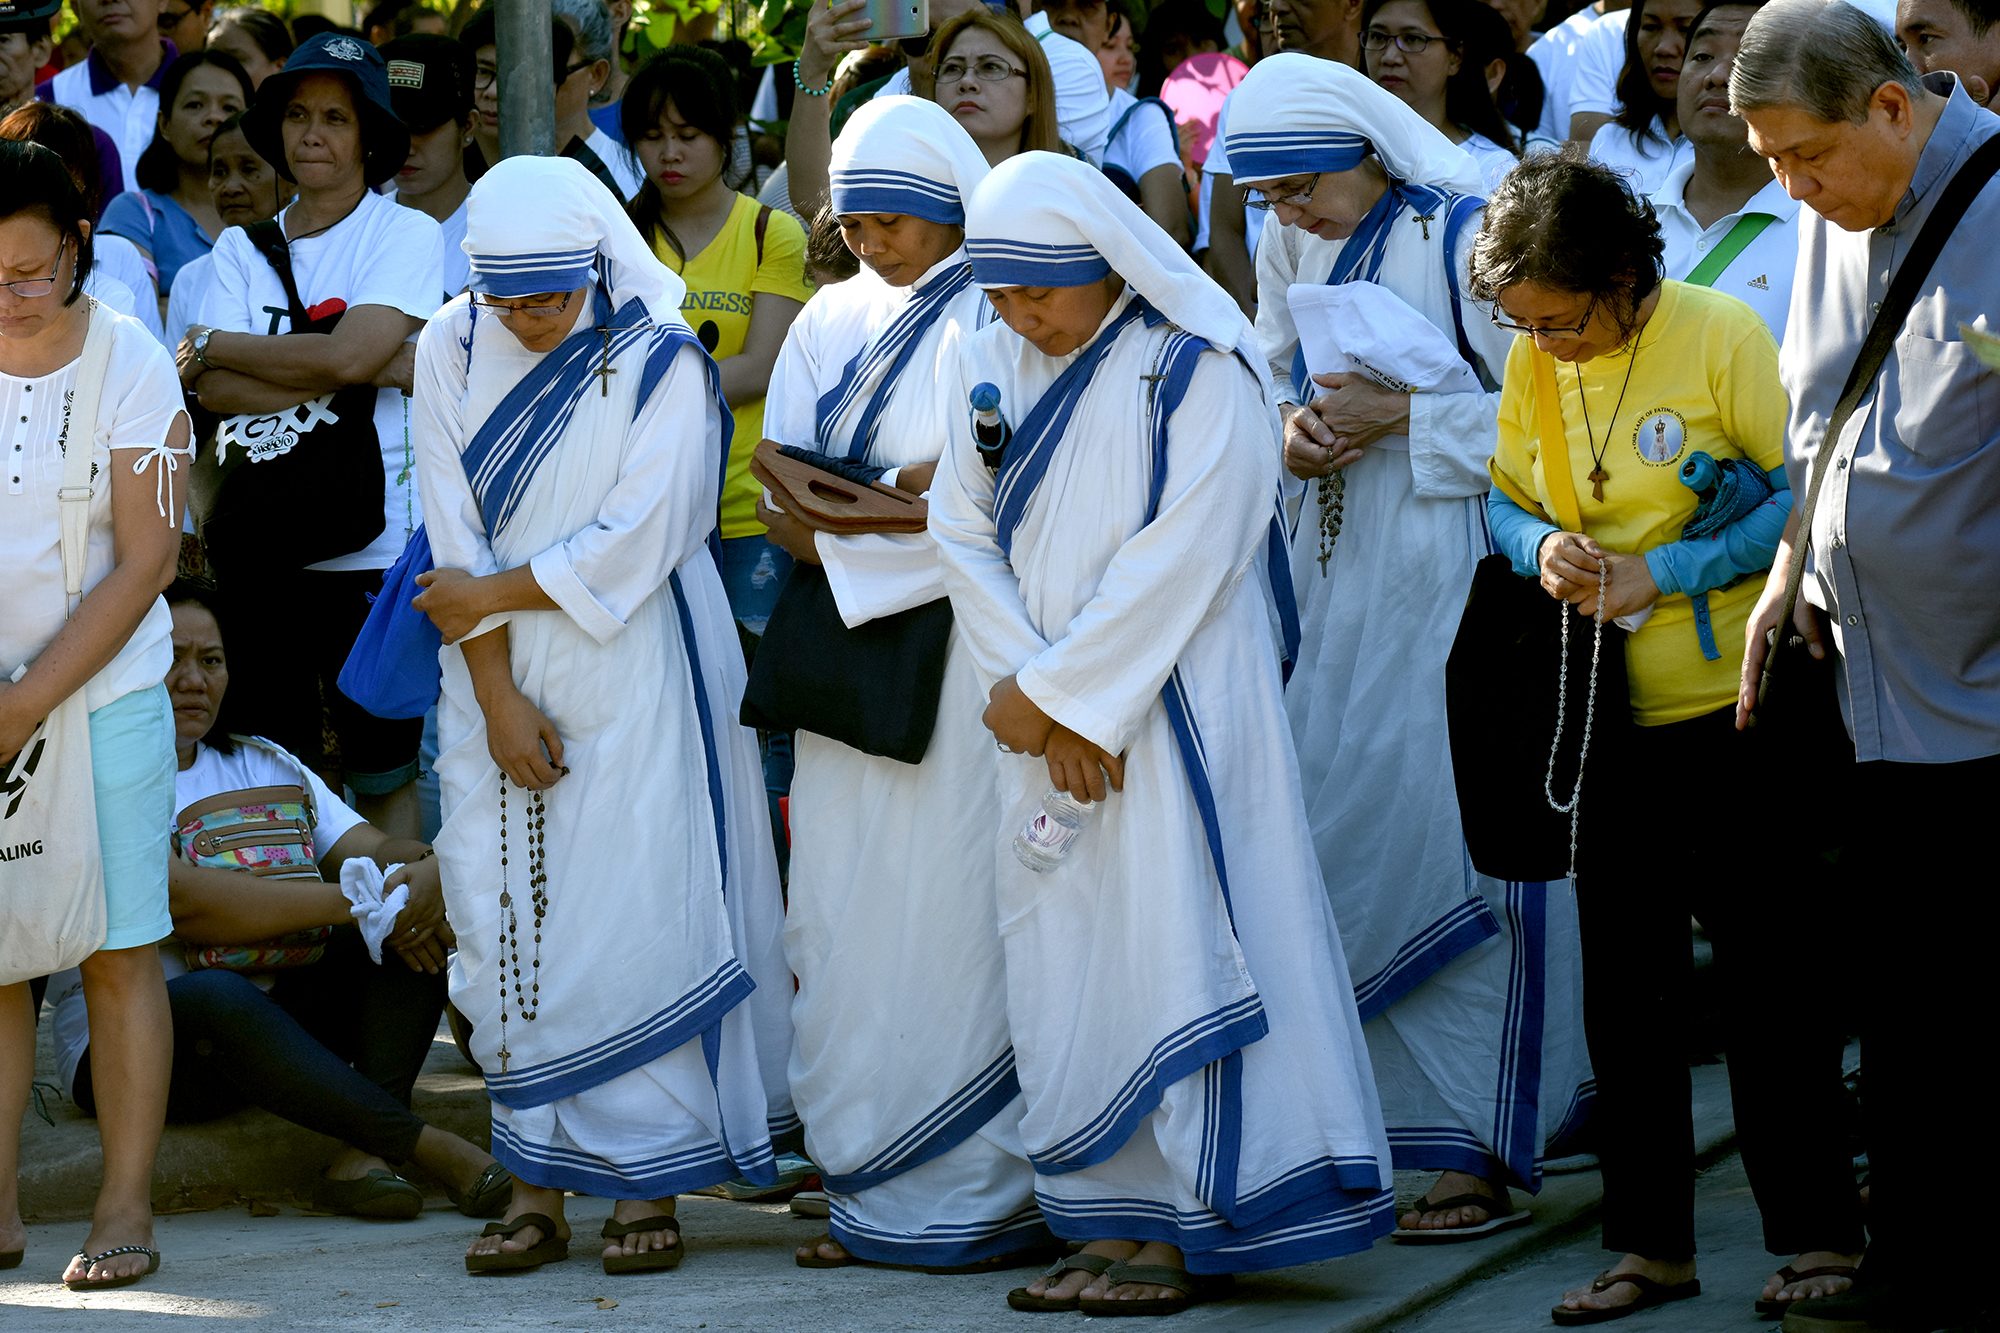 IN PRAYER. Nuns pray during the Good Friday 'Walk for Life' event in Manila on April 14, 2017. Photo by Angie de Silva/Rappler 